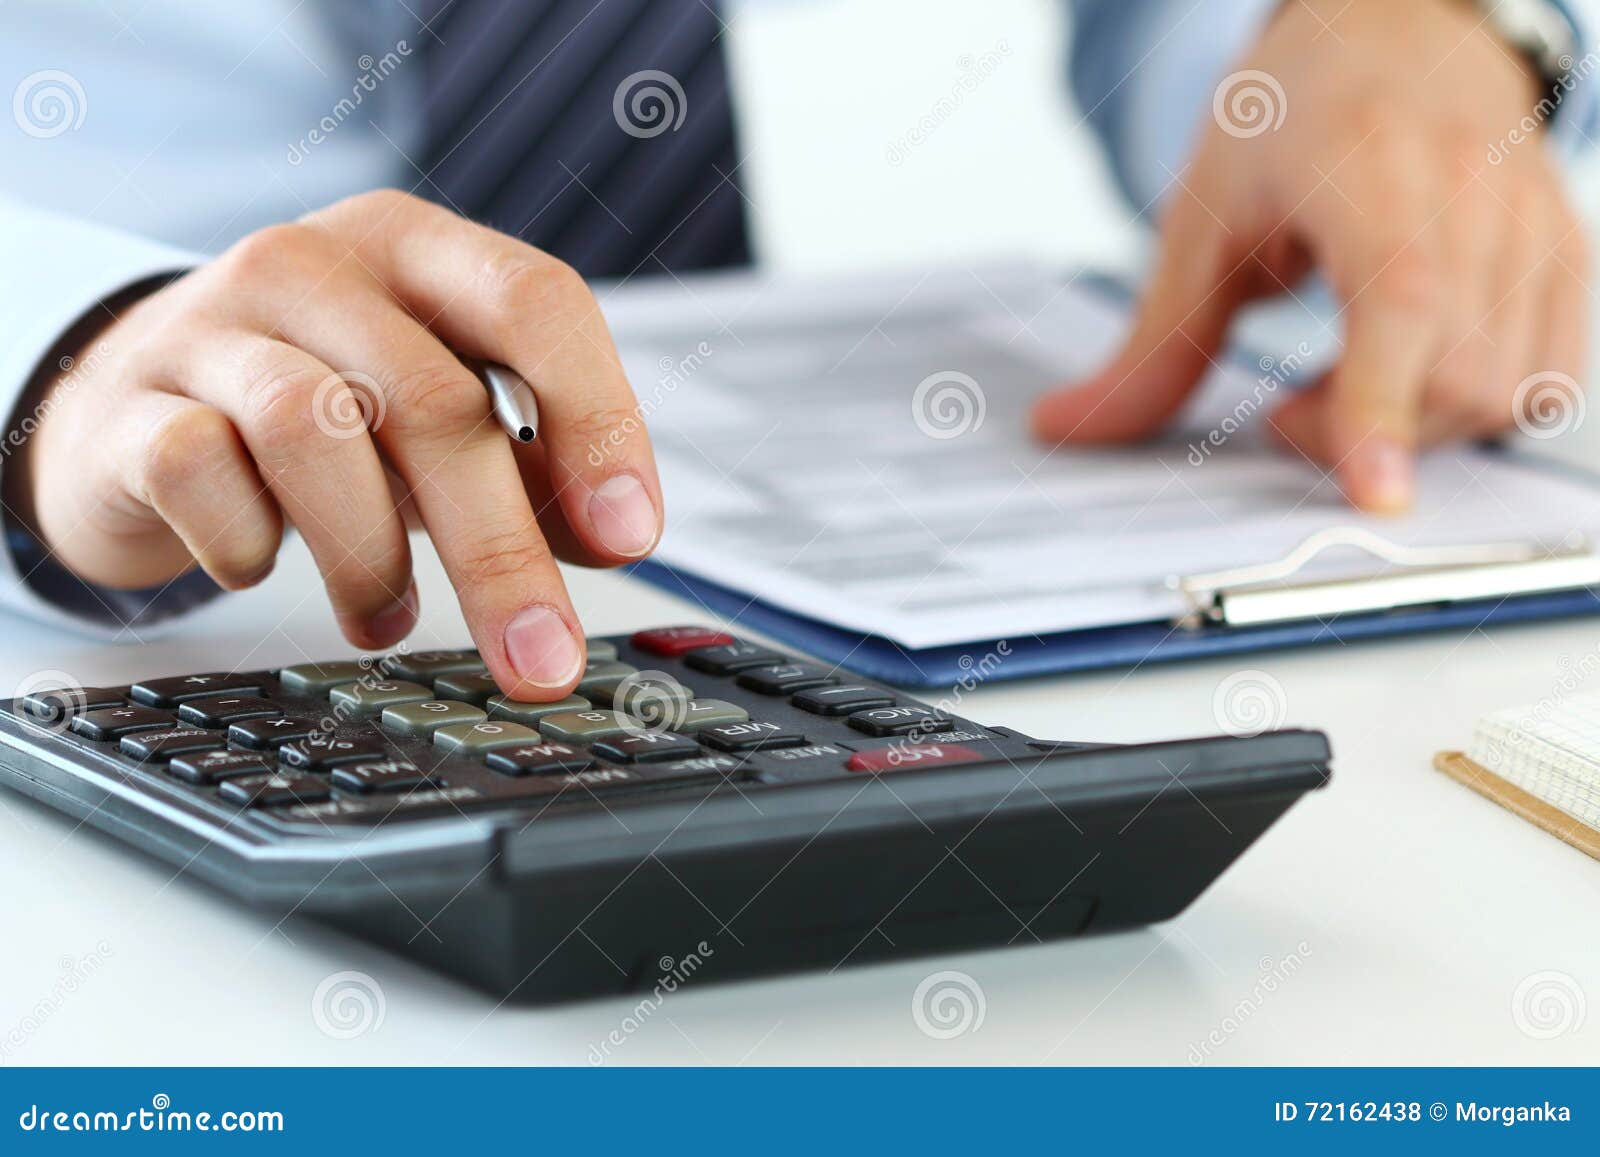 close up view of bookkeeper or financial inspector hands making